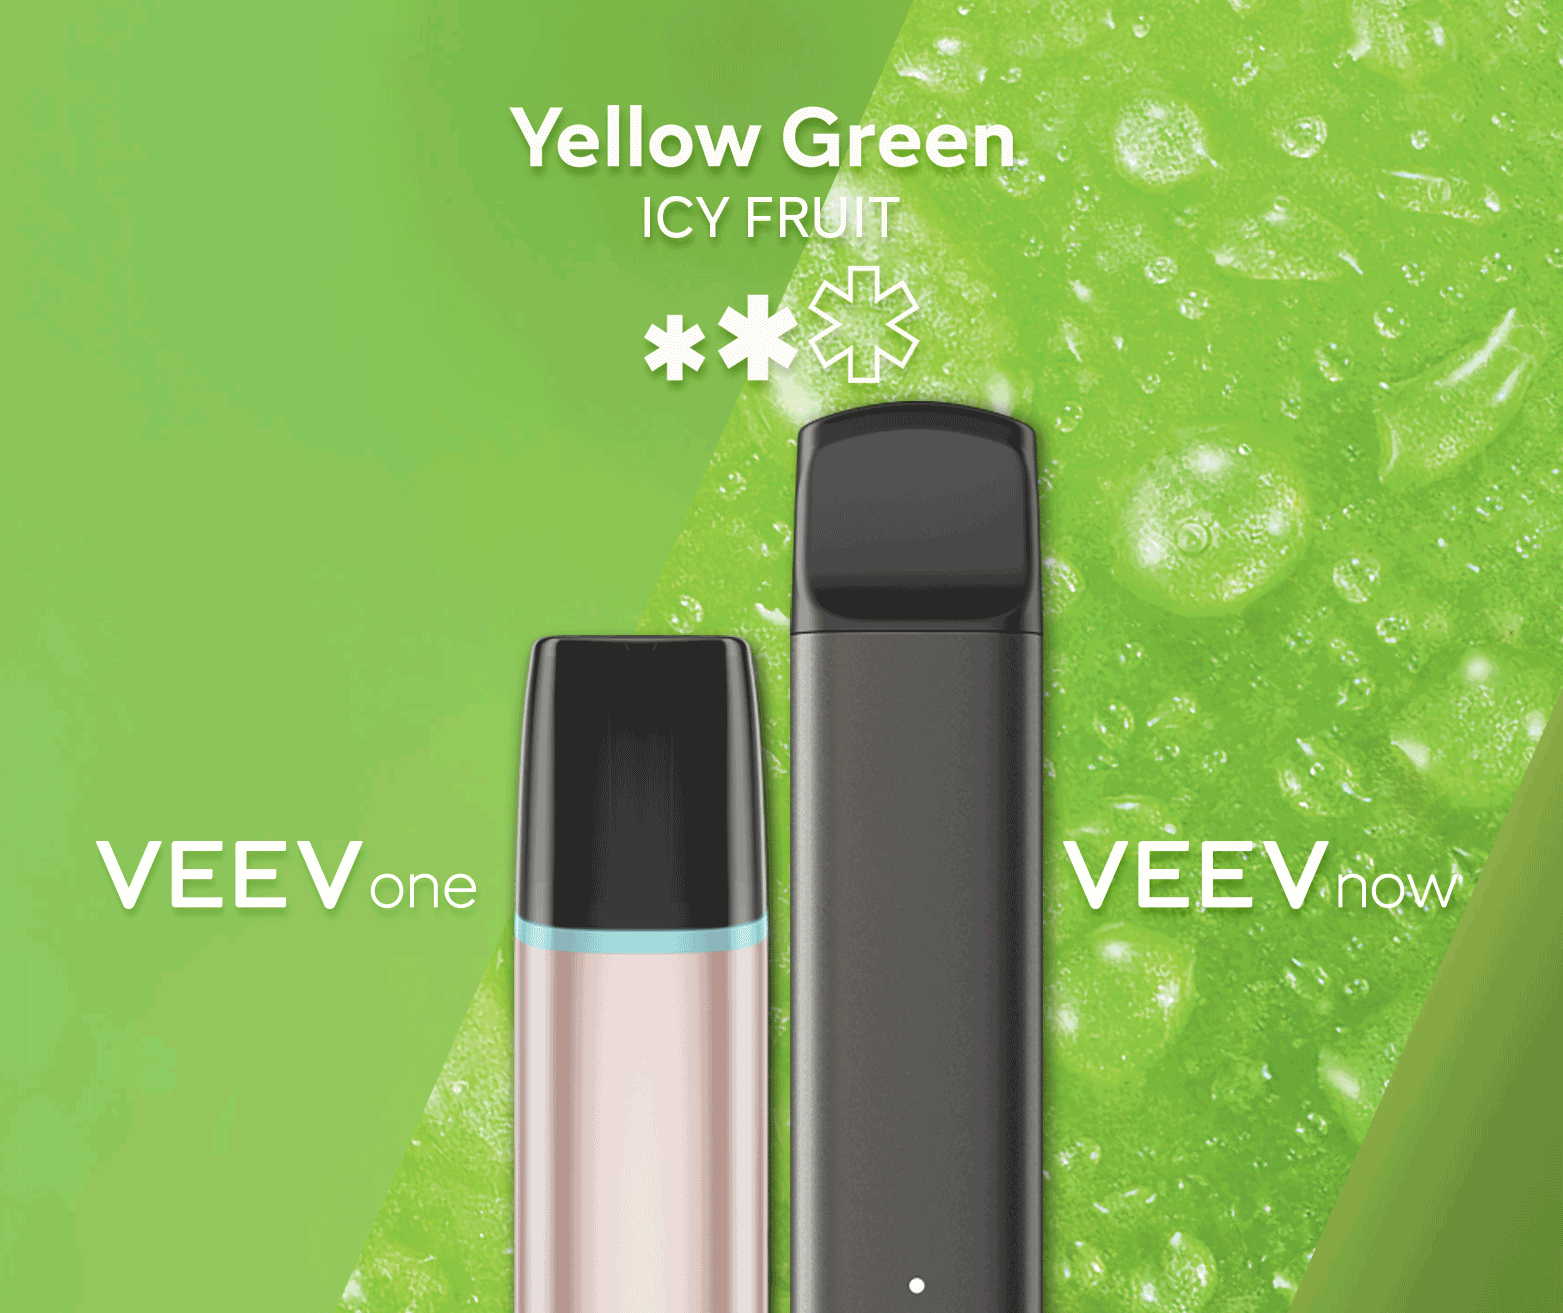 A VEEV ONE pod device and VEEV NOW disposable, both in Yellow Green flavour.